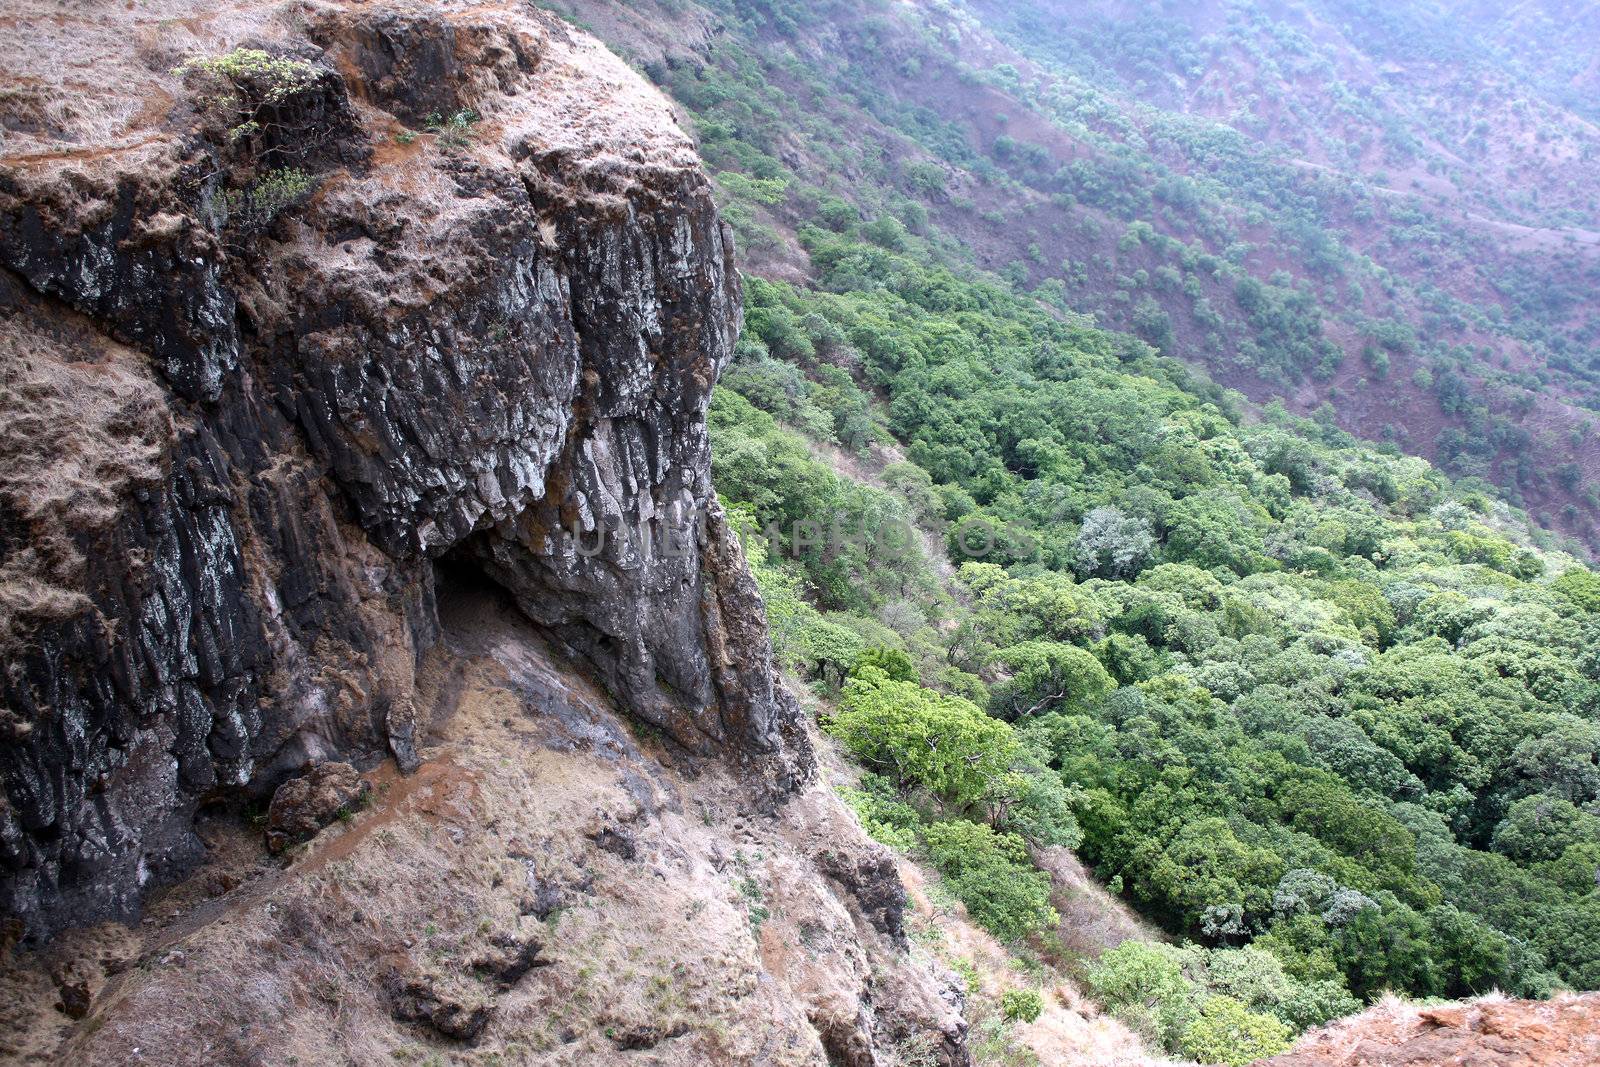 A picturesque background with the famous rock in the shape of an elephant head, in Mahabaleshwar, India.